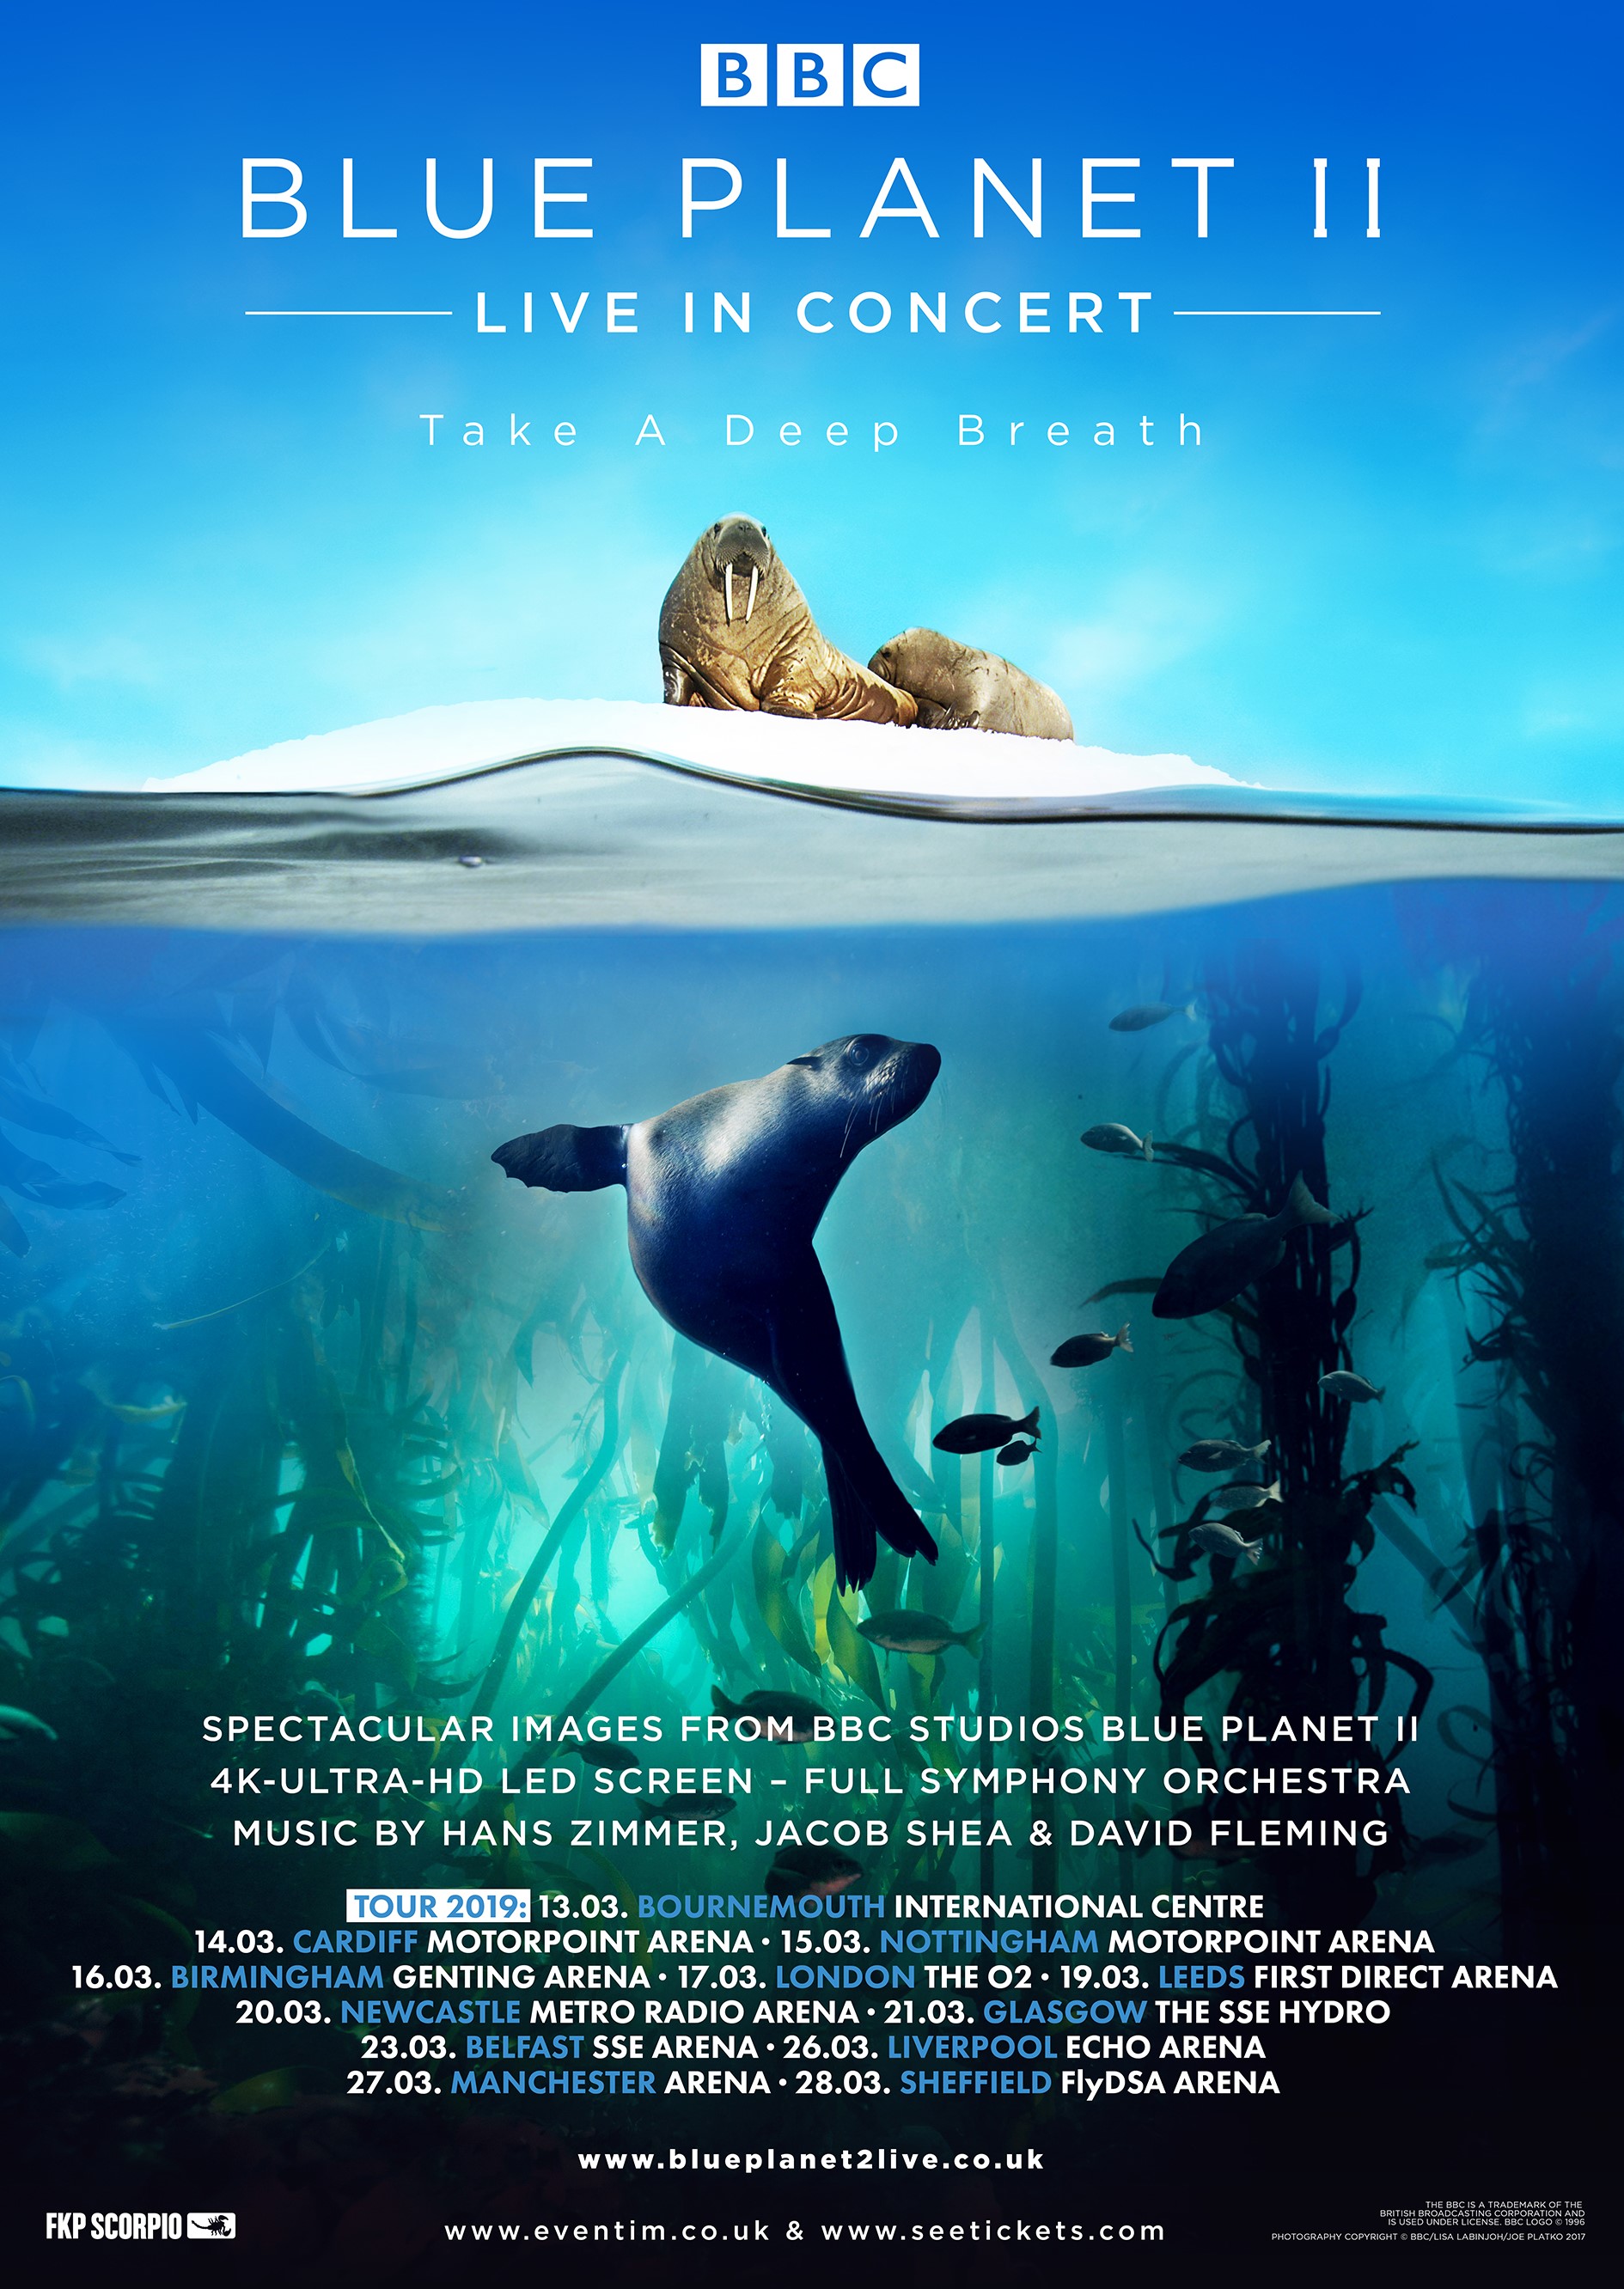 BBC Blue Planet II – Live in Concert